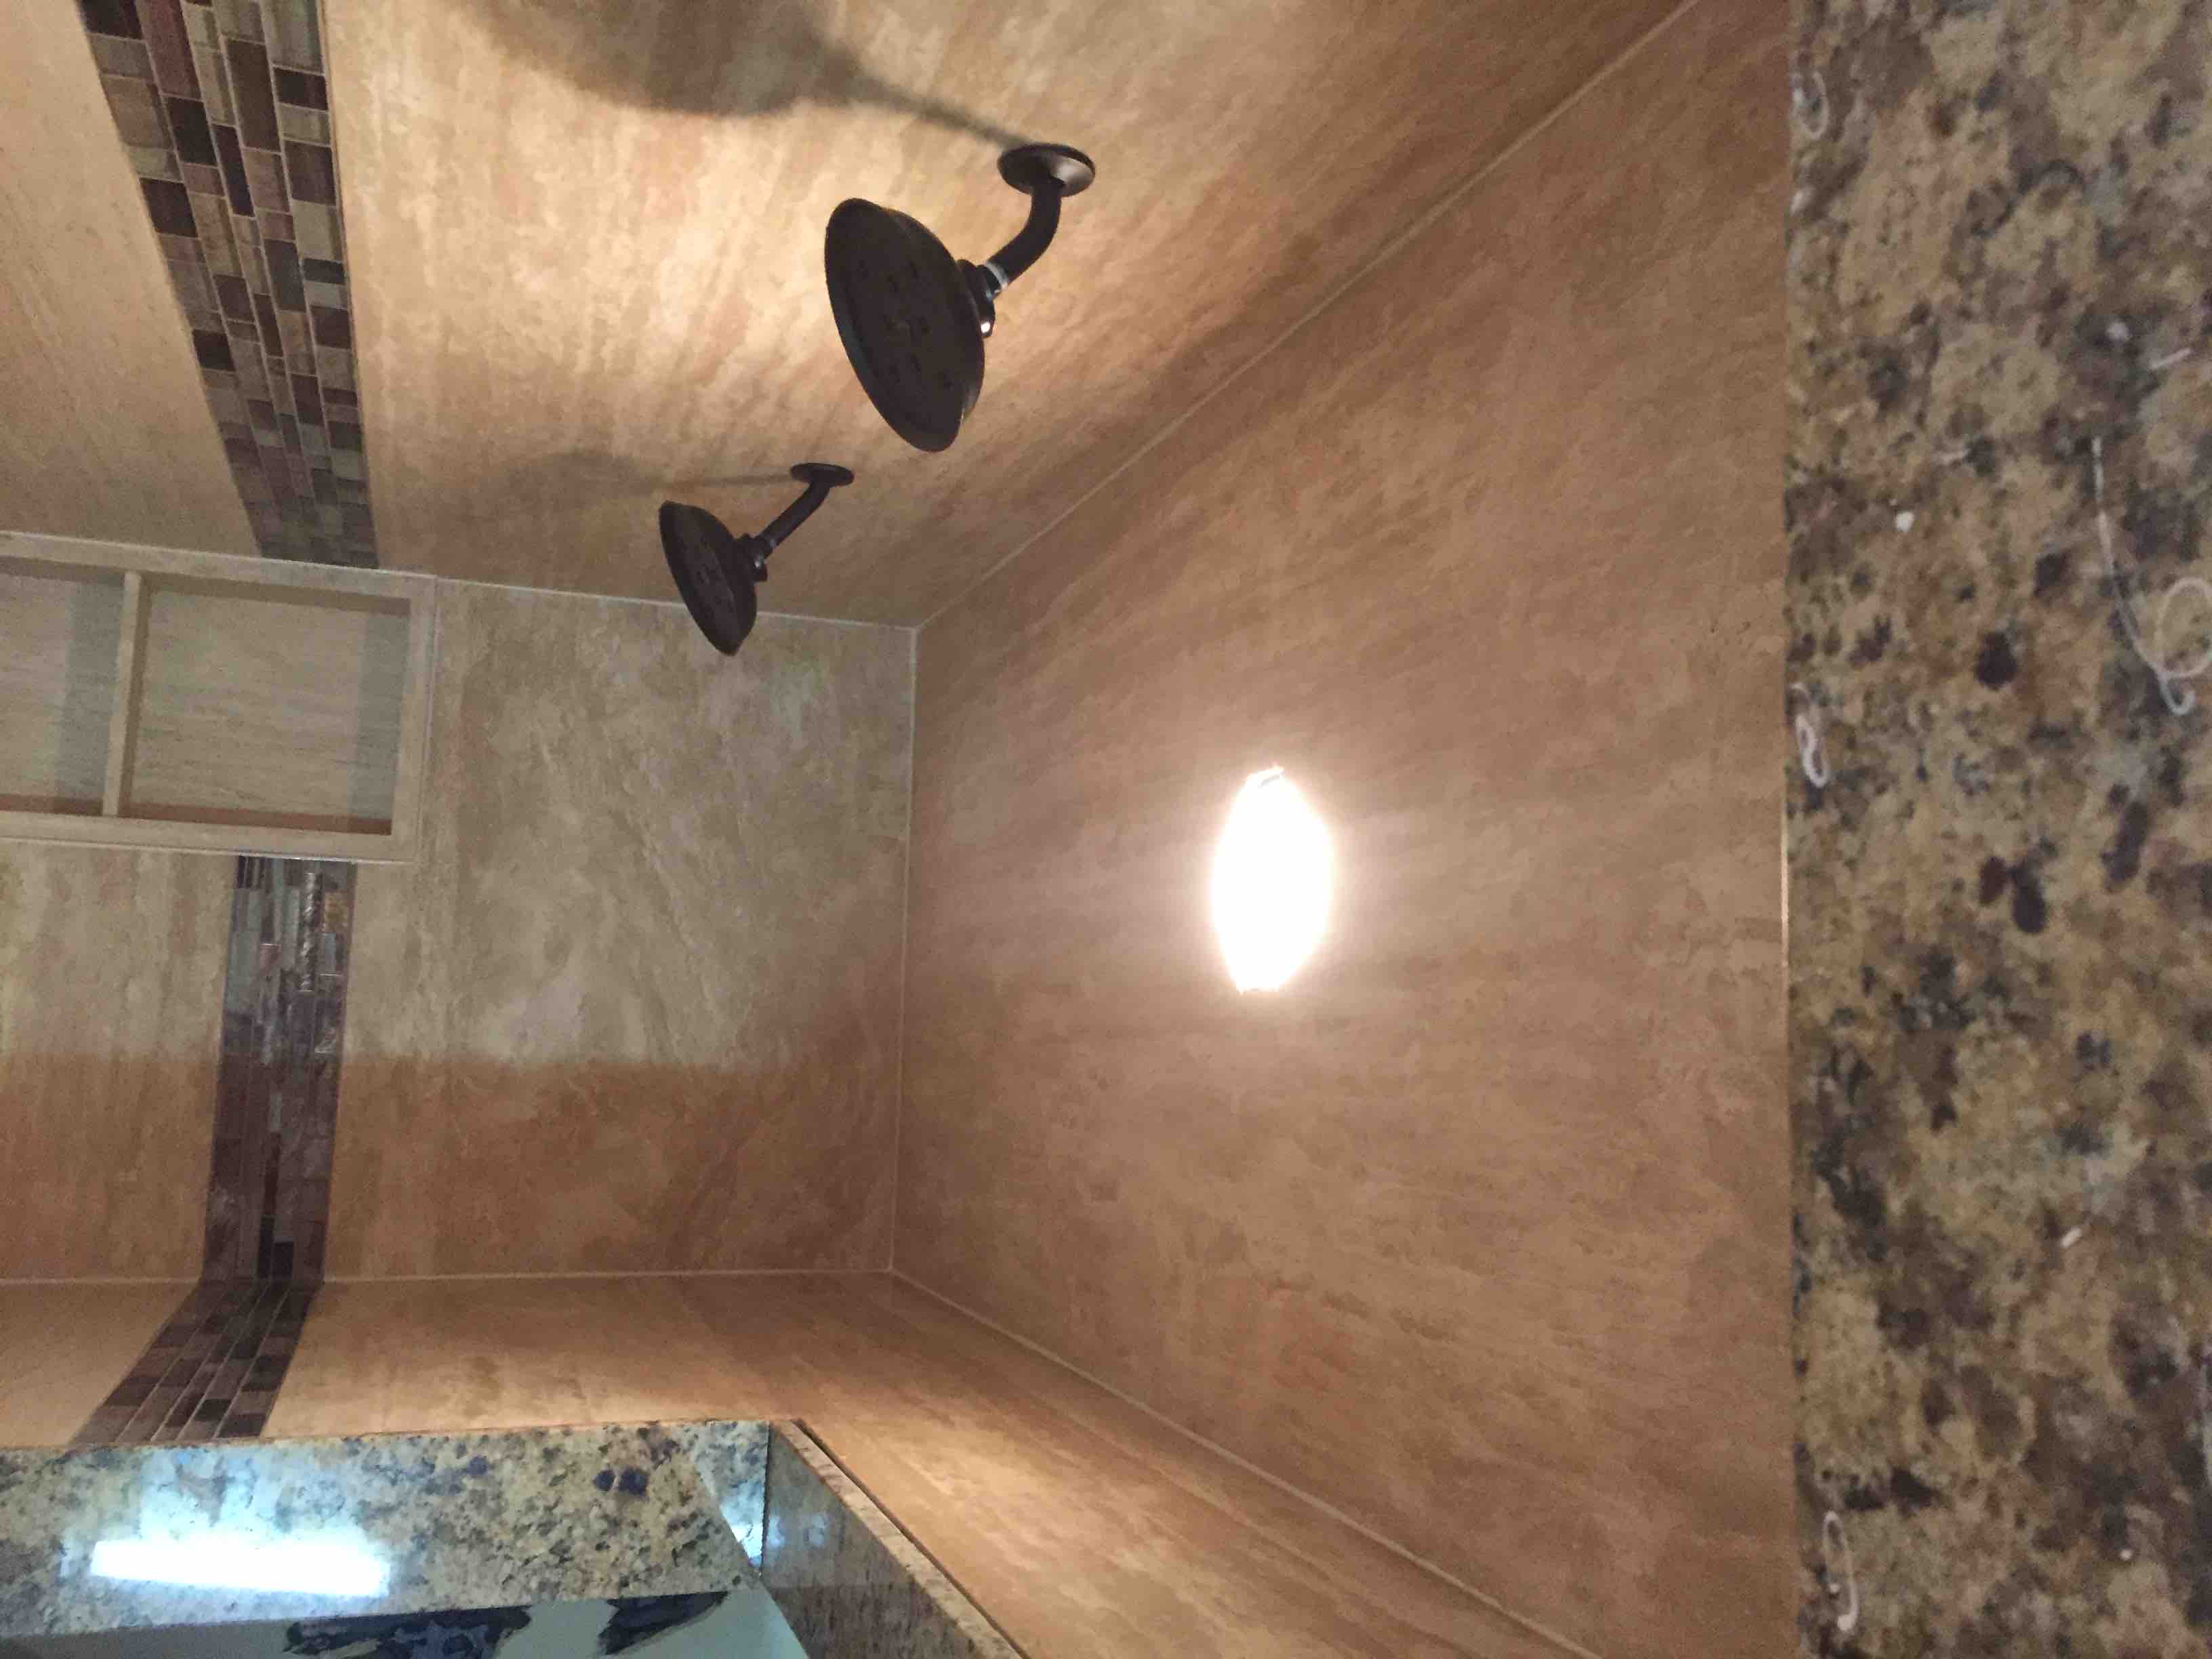 1 Custom Ivory Vein Groutless Showers from California Doors and Windows